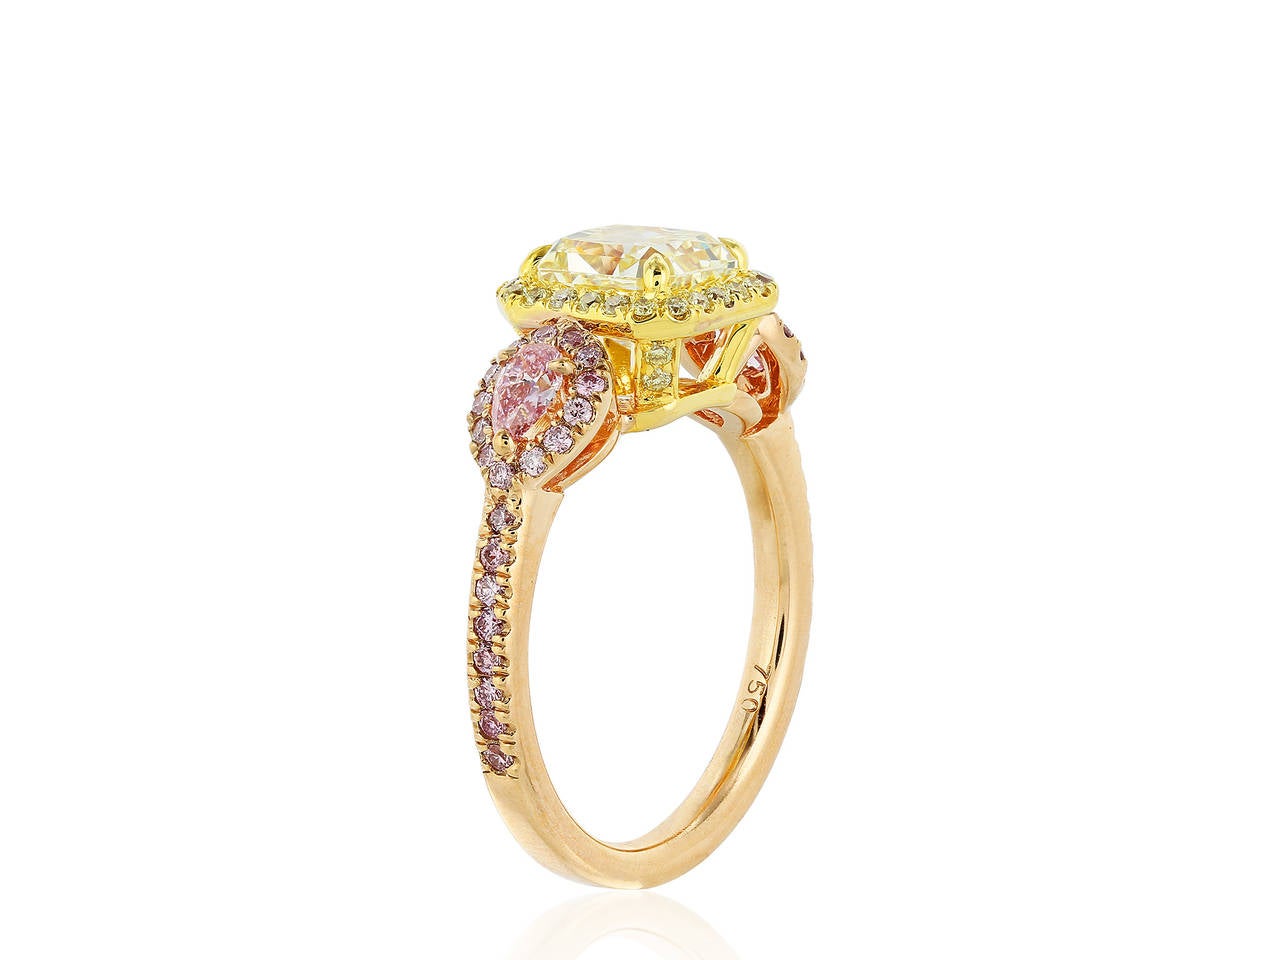 18 karat two tone rose and yellow gold three stone ring consisting of one radiant cut diamond weighing 1.67 carats , measuring 6.65 x 6.14 x 4.50 mm, having a color and clarity of Fancy Yellow/ VVS2 wigh GIA Report 6167636991 surrounded by a halo of